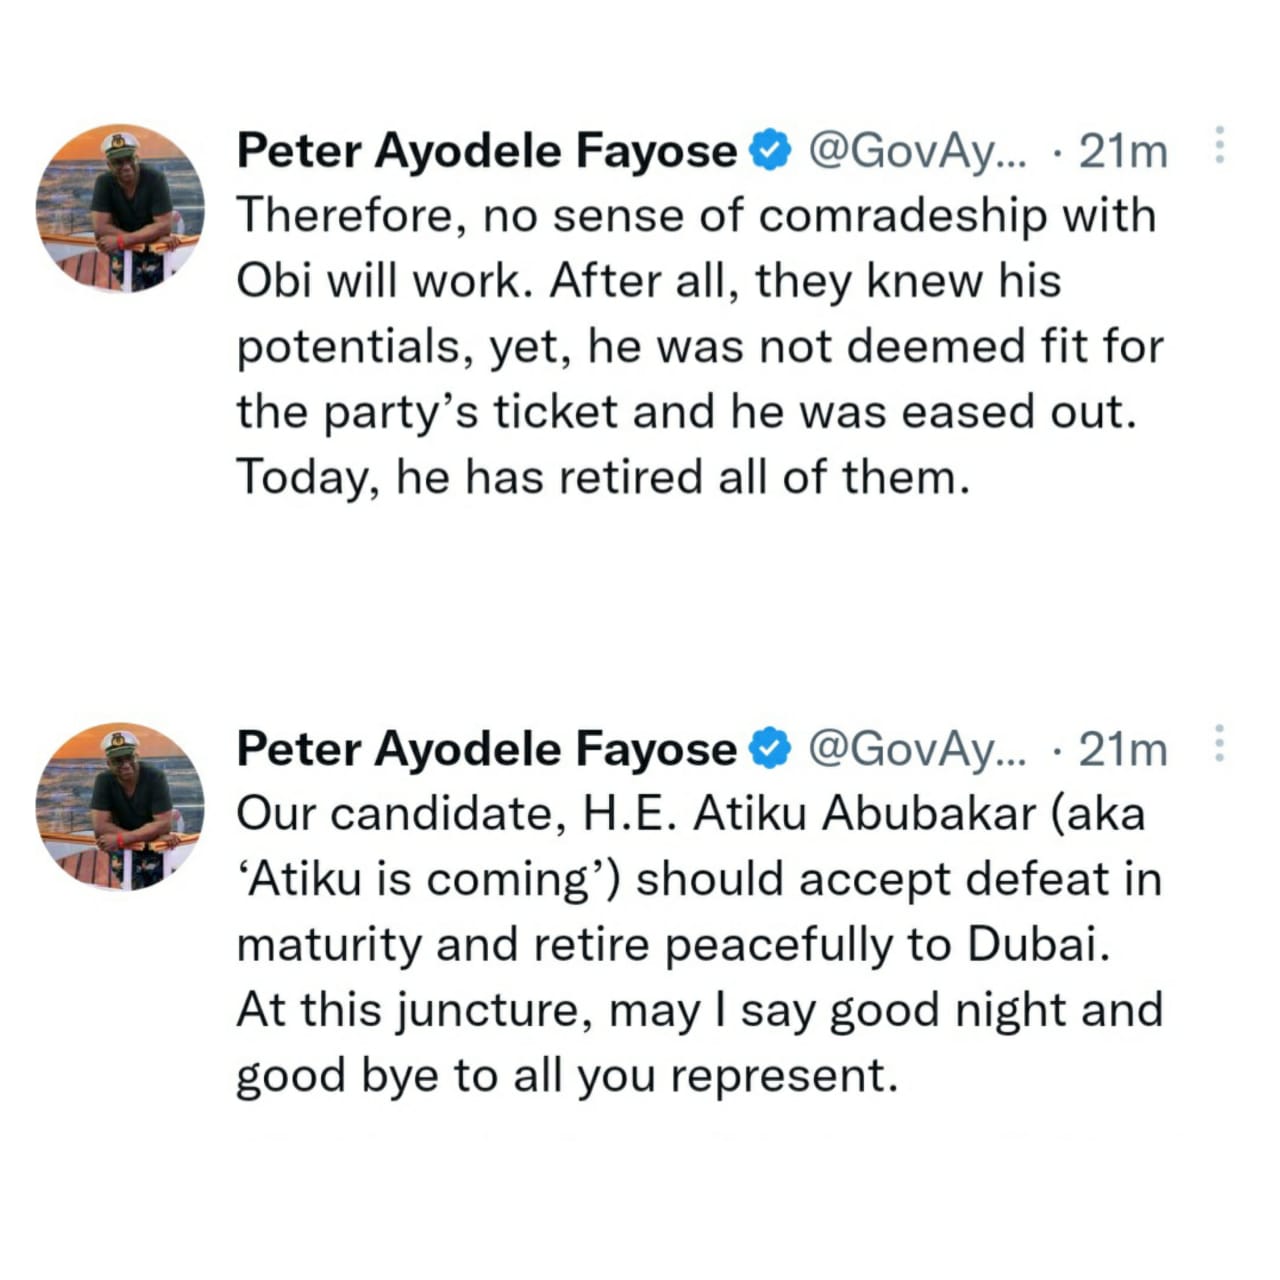 Accept defeat in maturity and retire peacefully to Dubai - Ayo Fayose tells PDP Presidential candidate,  Atiku Abubakar as he drags his own Party and praises Peter Obi and Labour Party